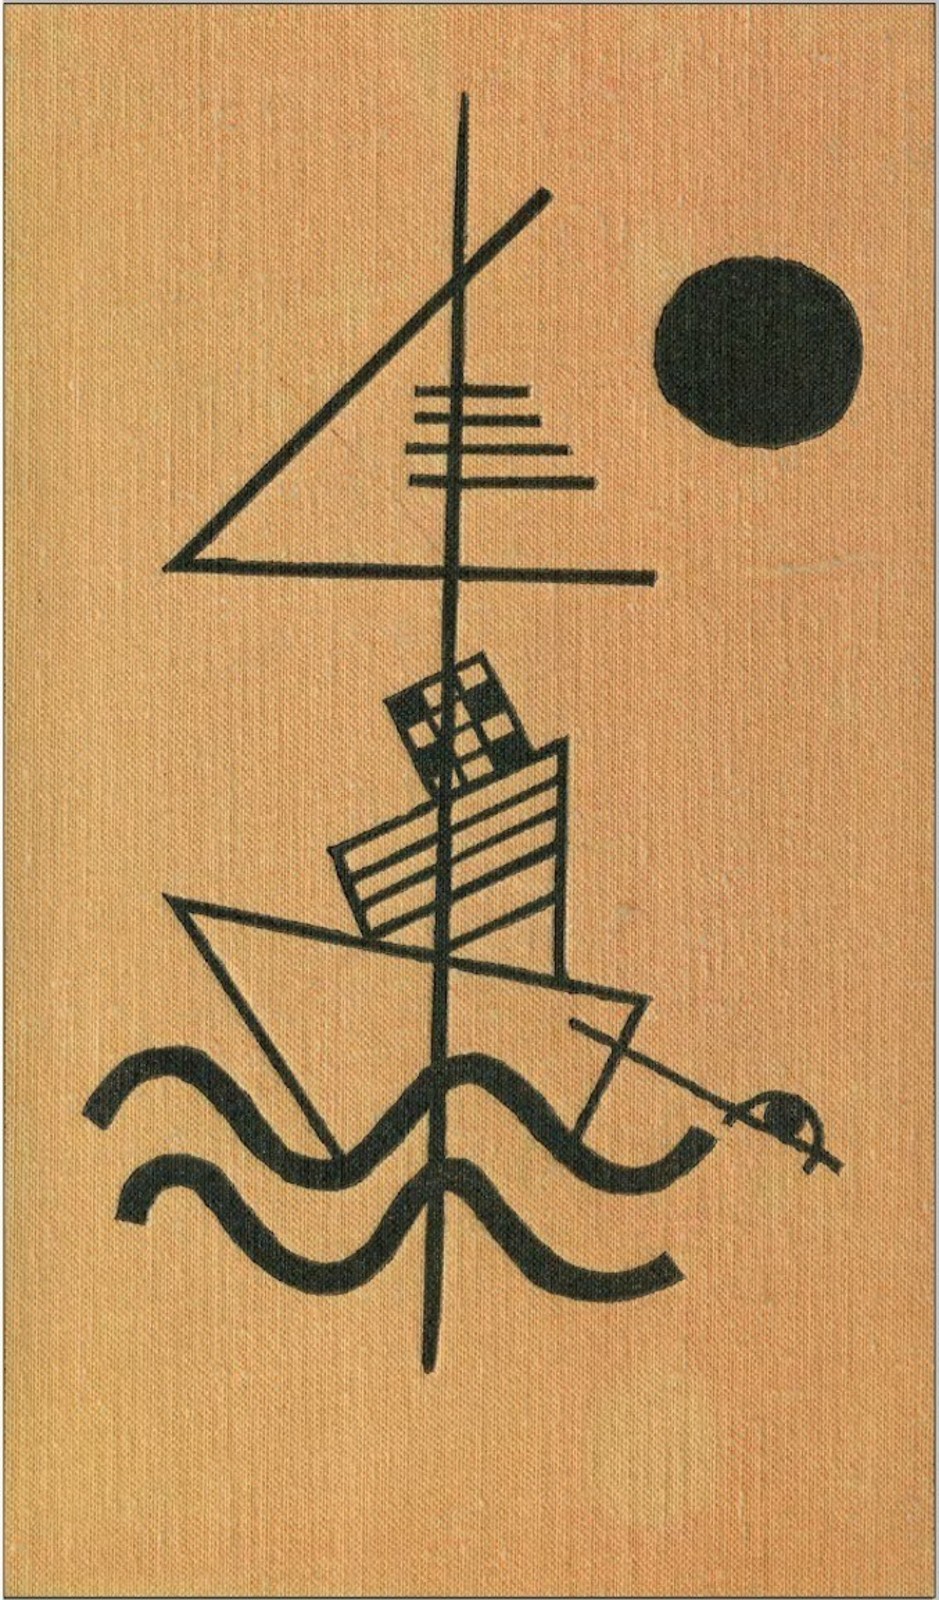 Cover of the publication Mikhail Lifshitz and Lidiya Reingardt The Crisis of Ugliness: From Cubism to Pop Art (Moscow: Iskusstvo, 1968) Design by Y.A. Smirnov Signed to print September 1, 1967